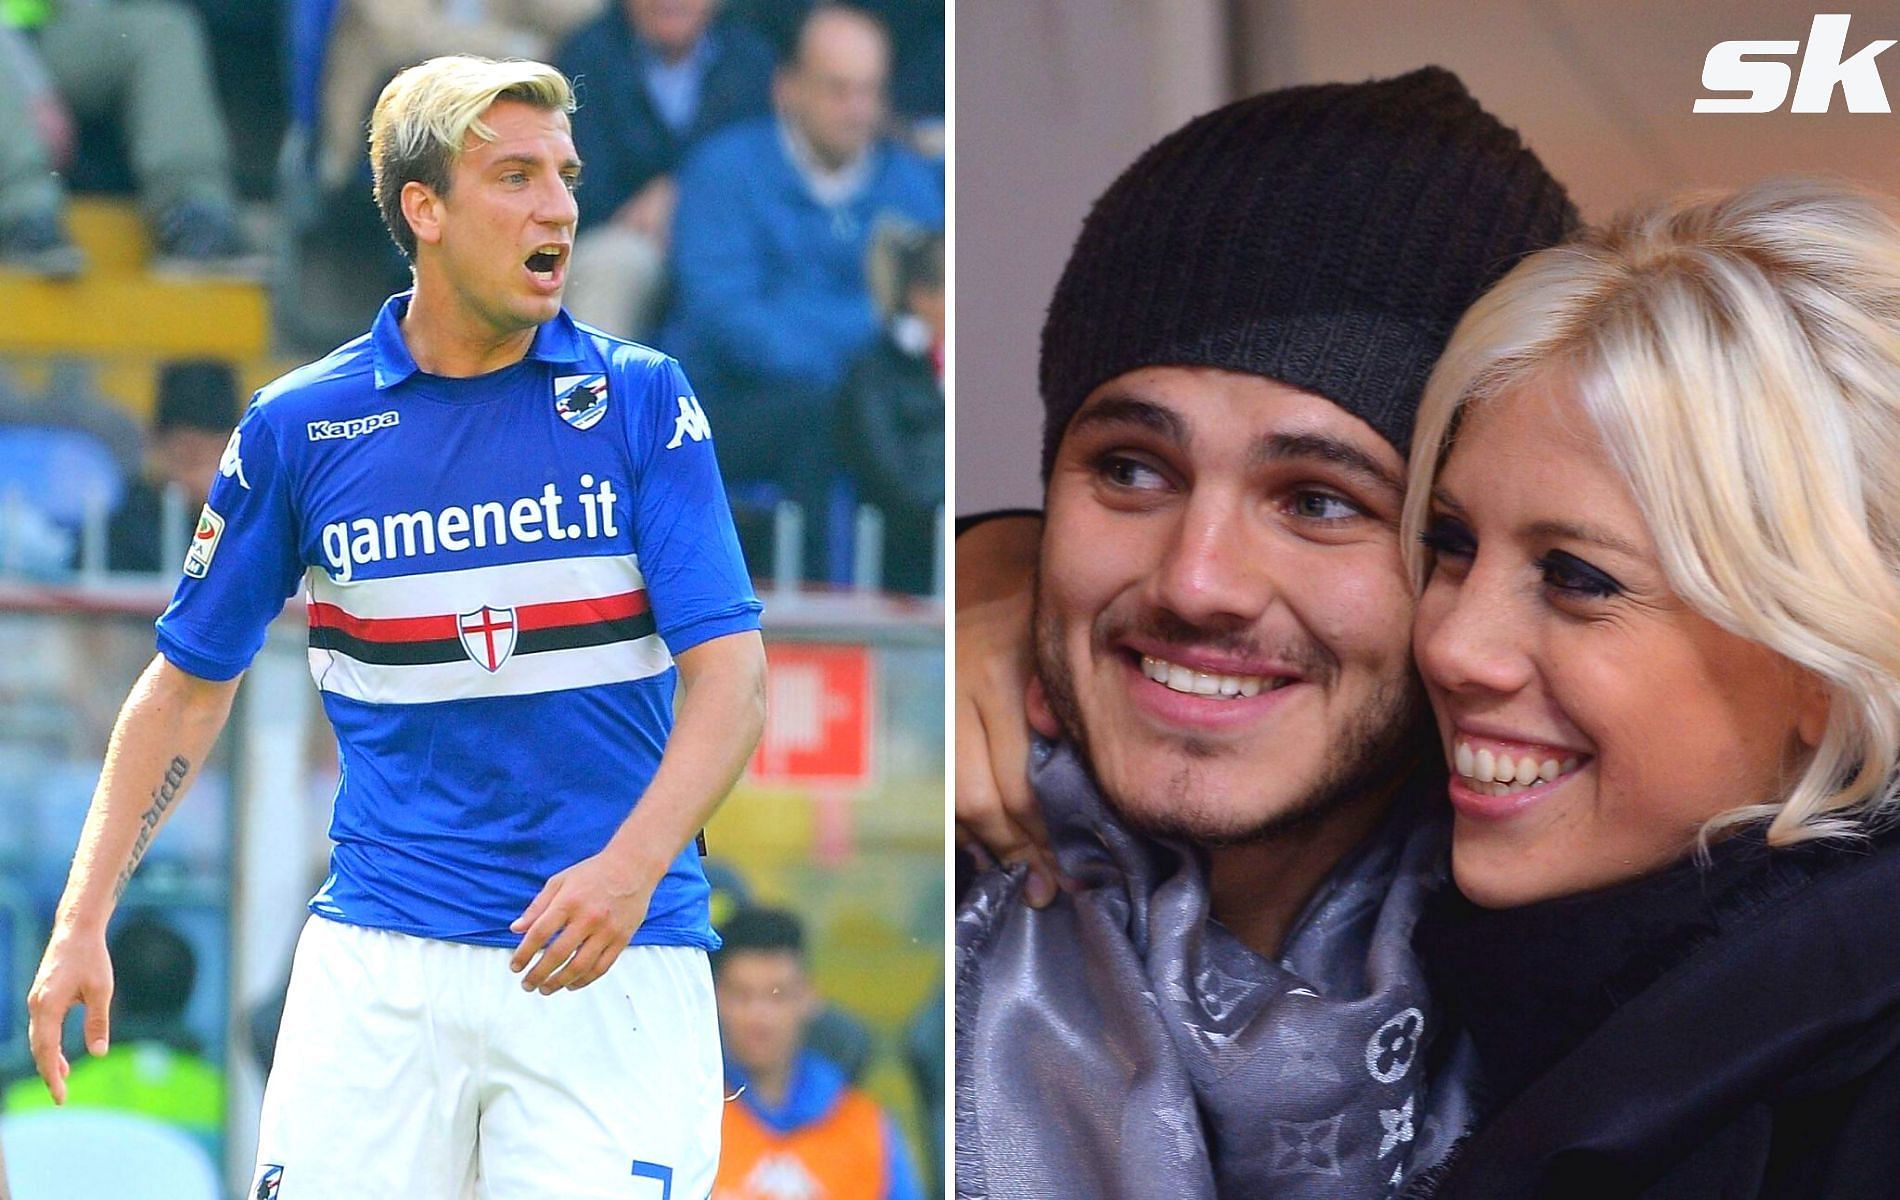 Lopez and Icardi were involved in a dramatic love triangle with Wanda Nara